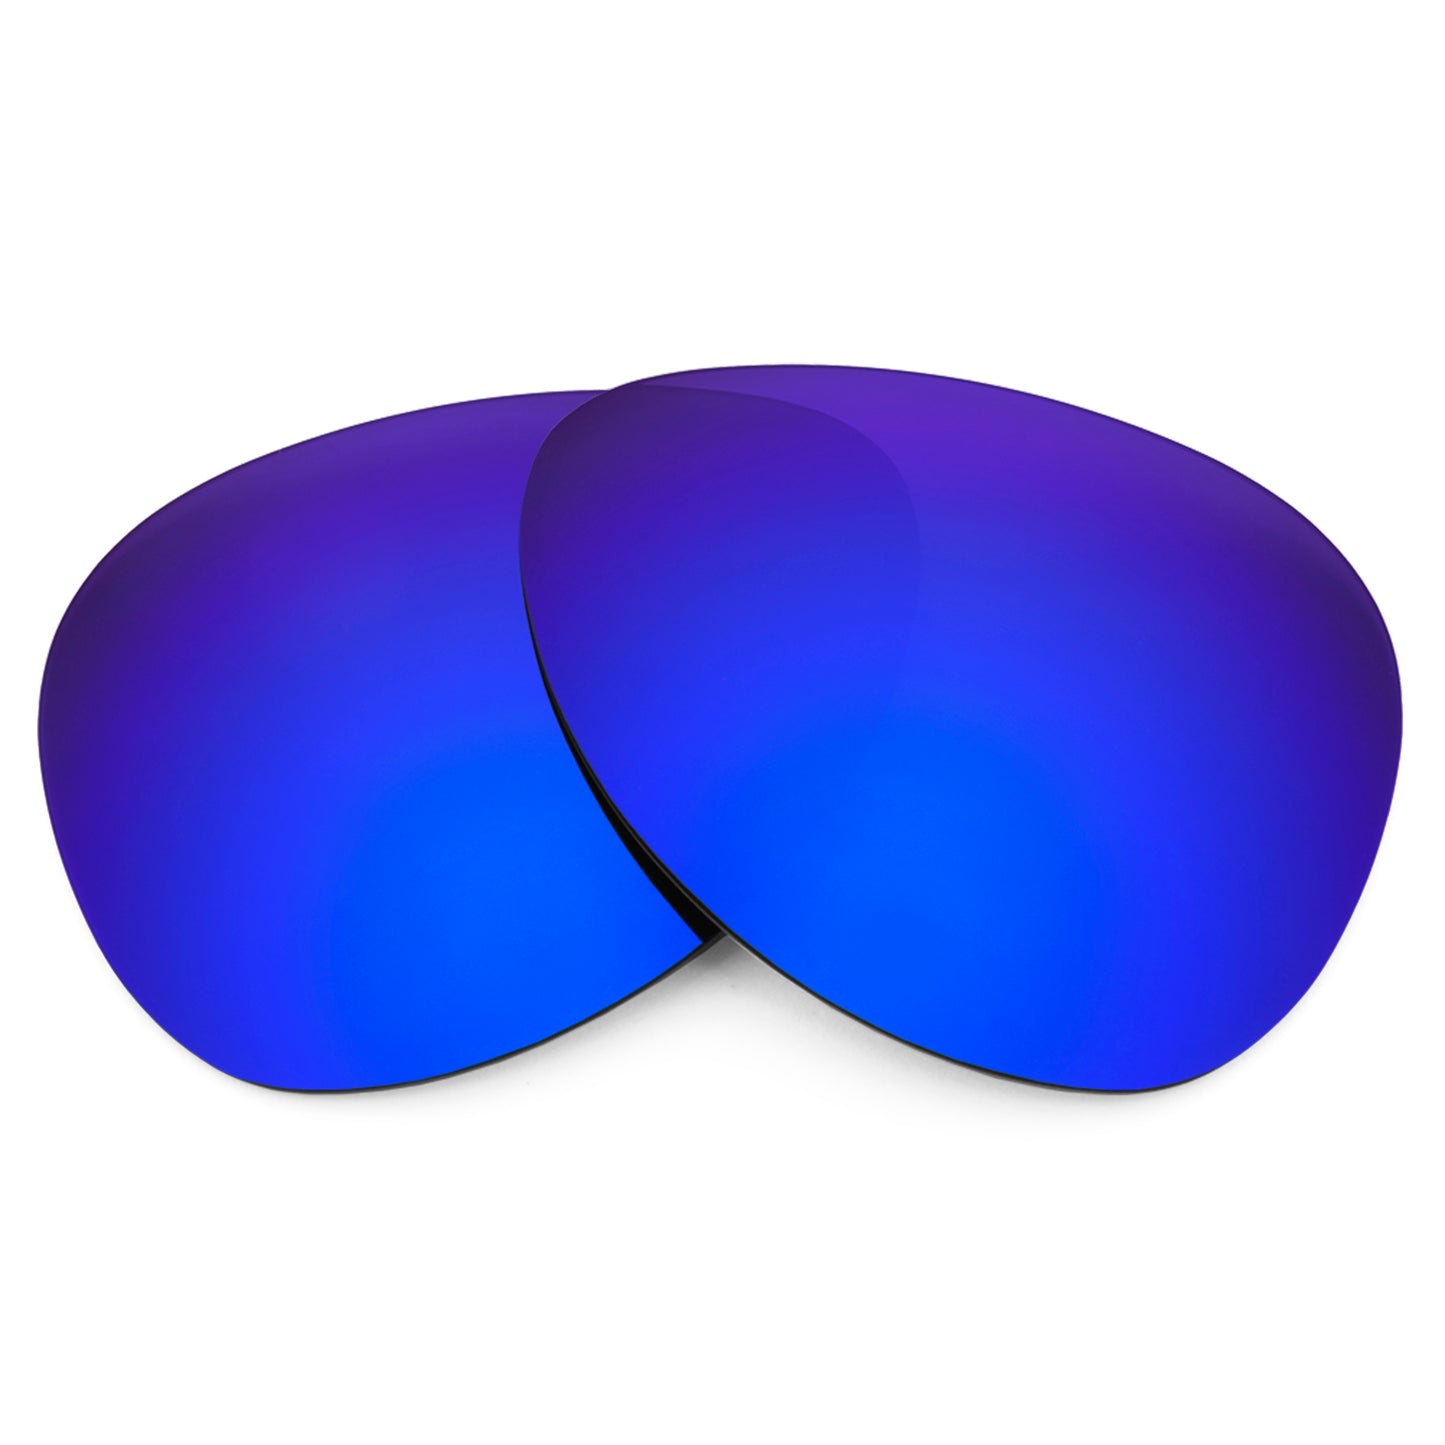 Revant replacement lenses for Ray-Ban Aviator RB3025 58mm Non-Polarized Tidal Blue